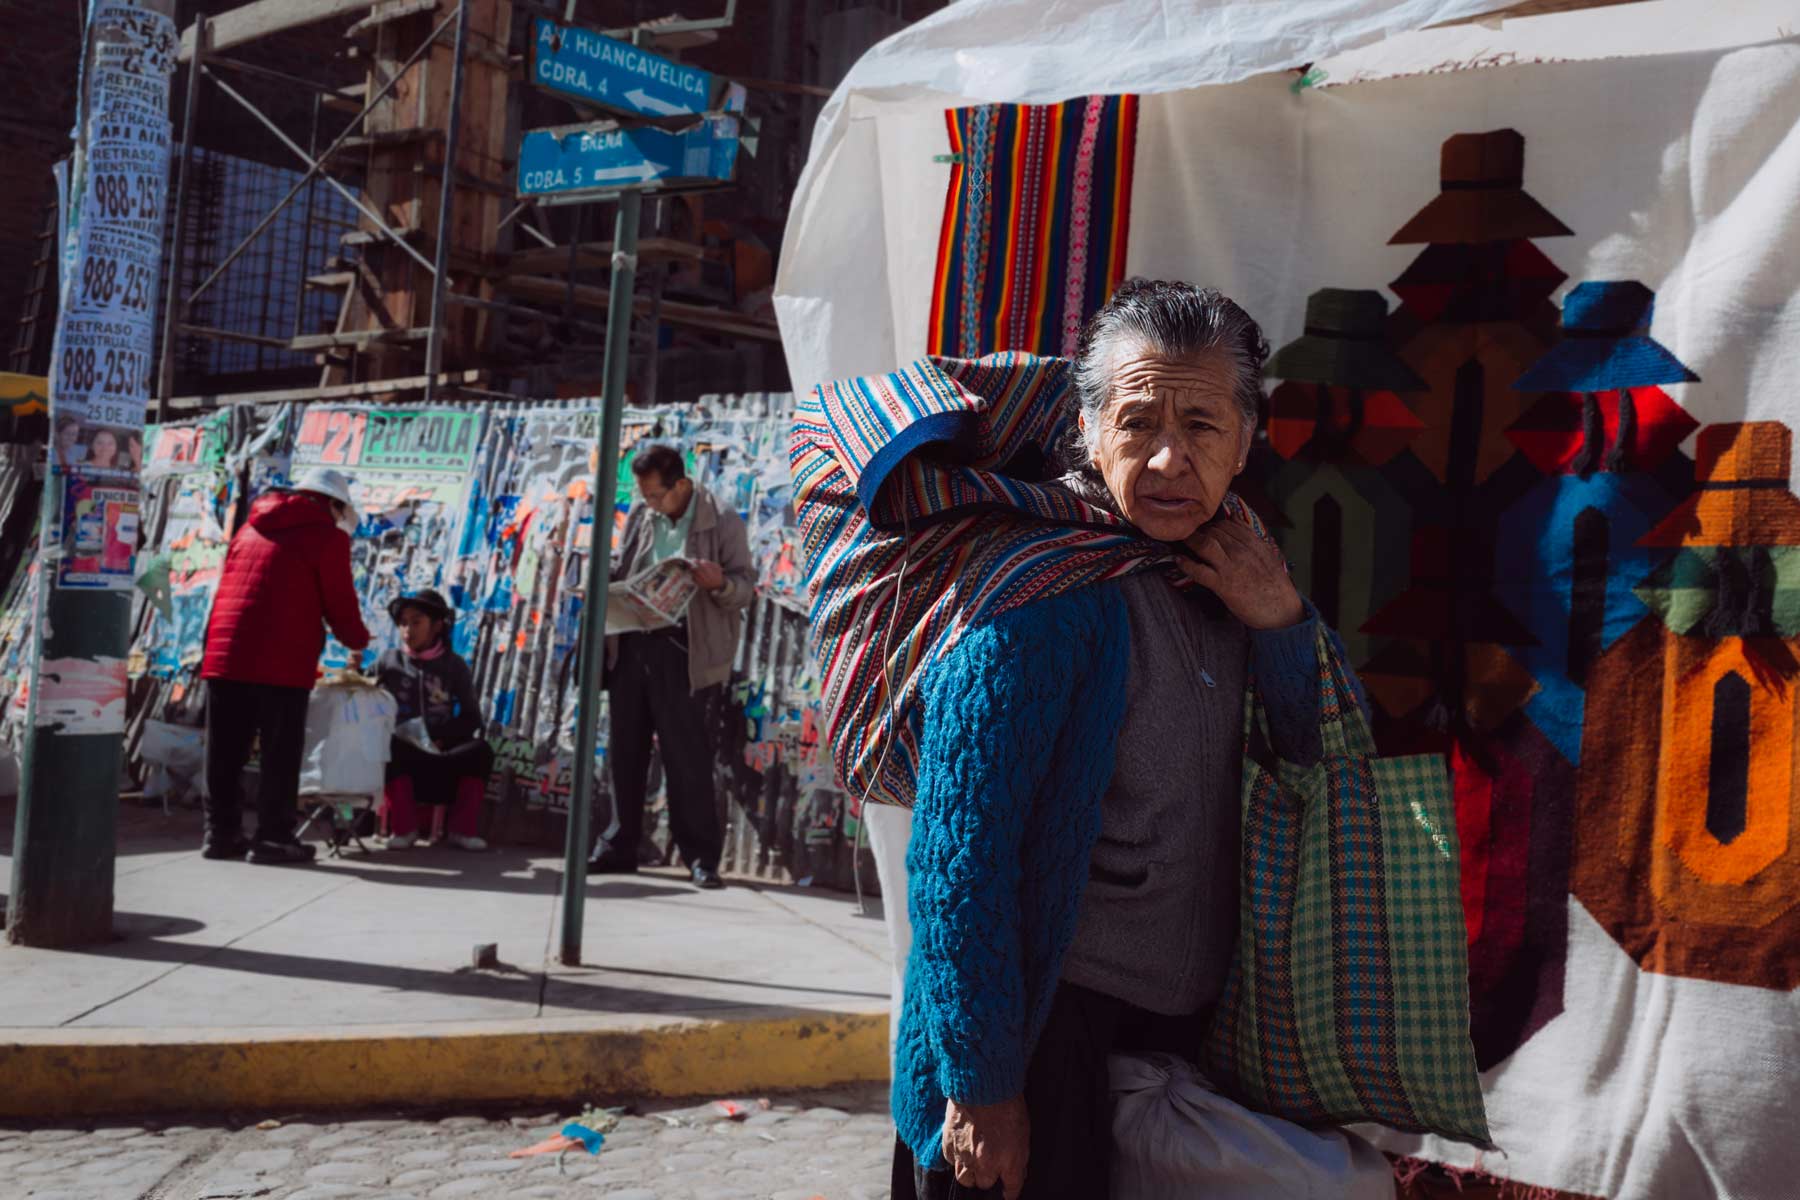 A woman carries goods from a local market in Huancayo.